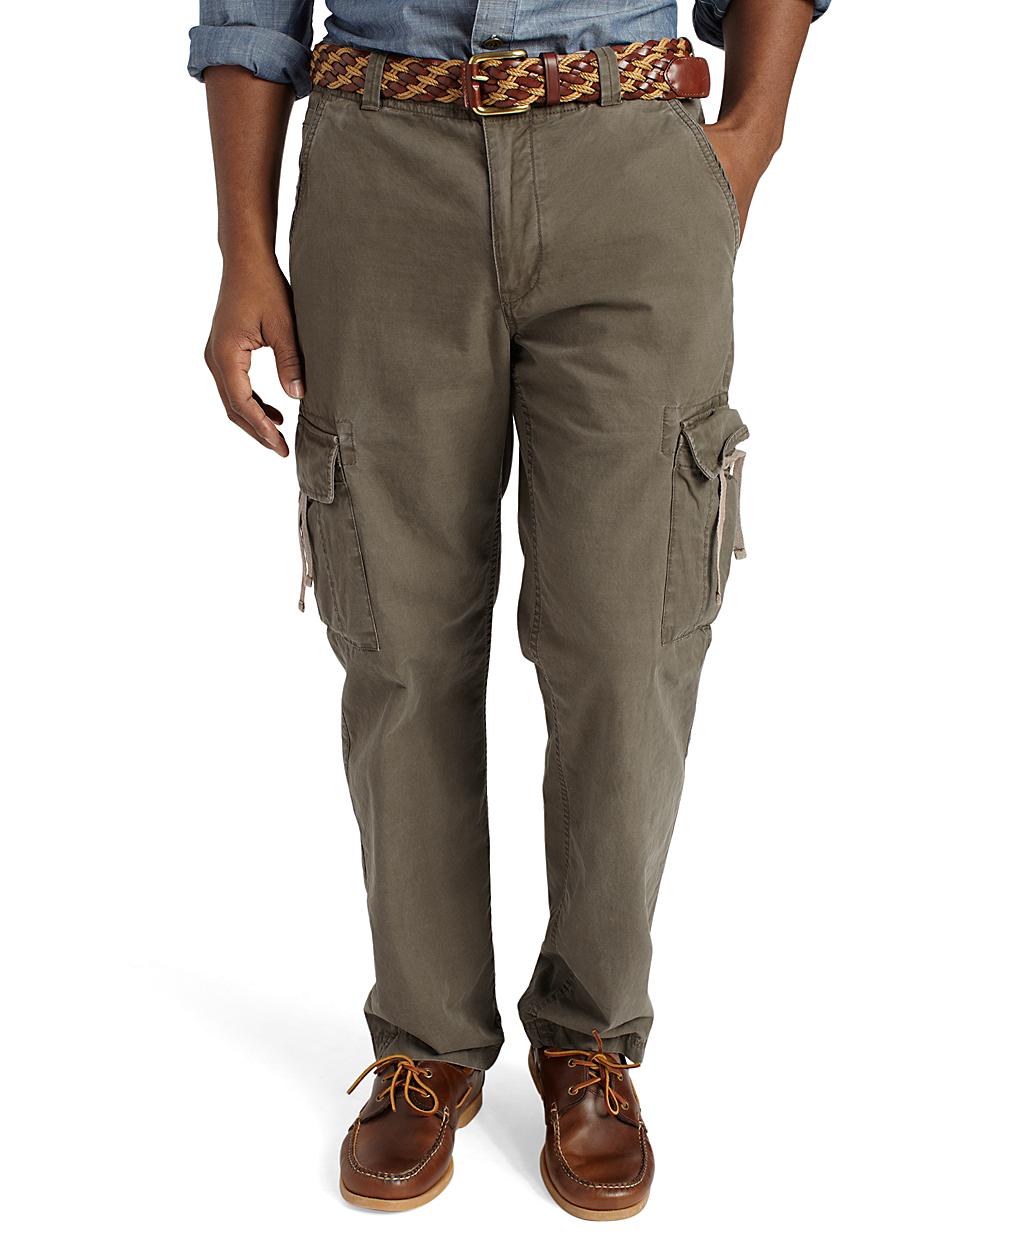 Brooks Brothers Cargo Pants in Light-Brown (Brown) for Men - Lyst